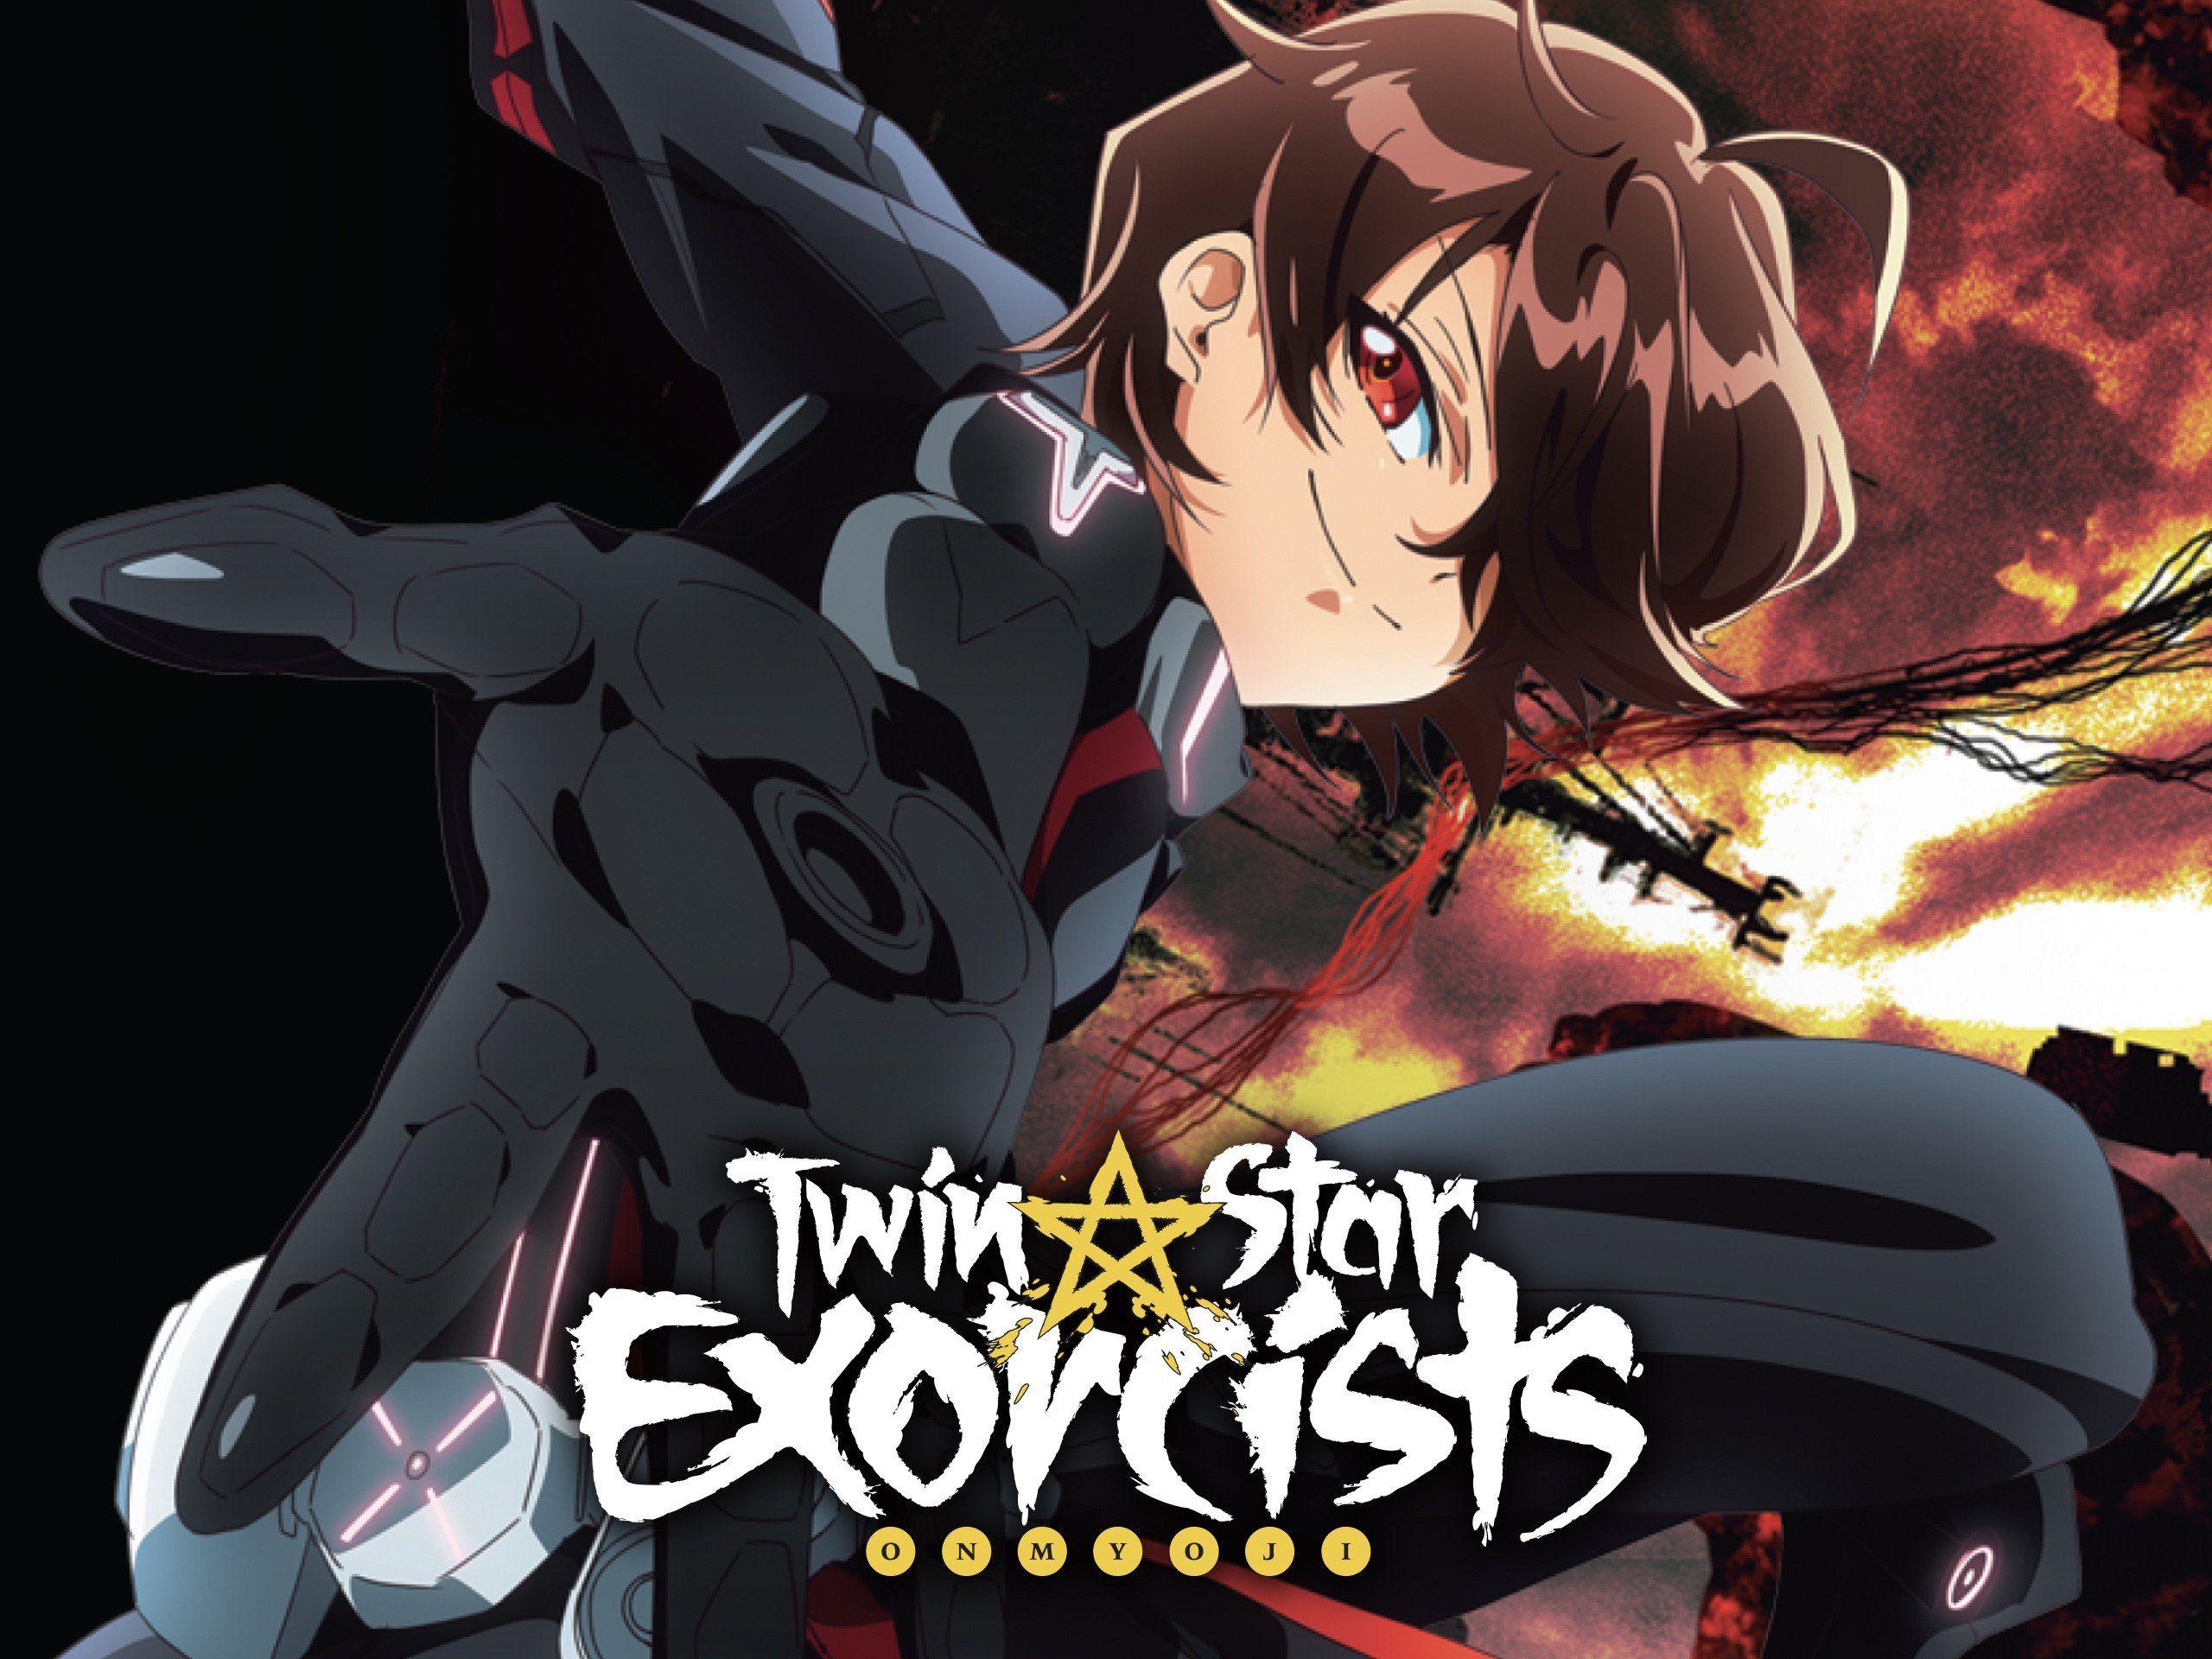 Twin Star Exorcists Wallpapers - Top Free Twin Star Exorcists